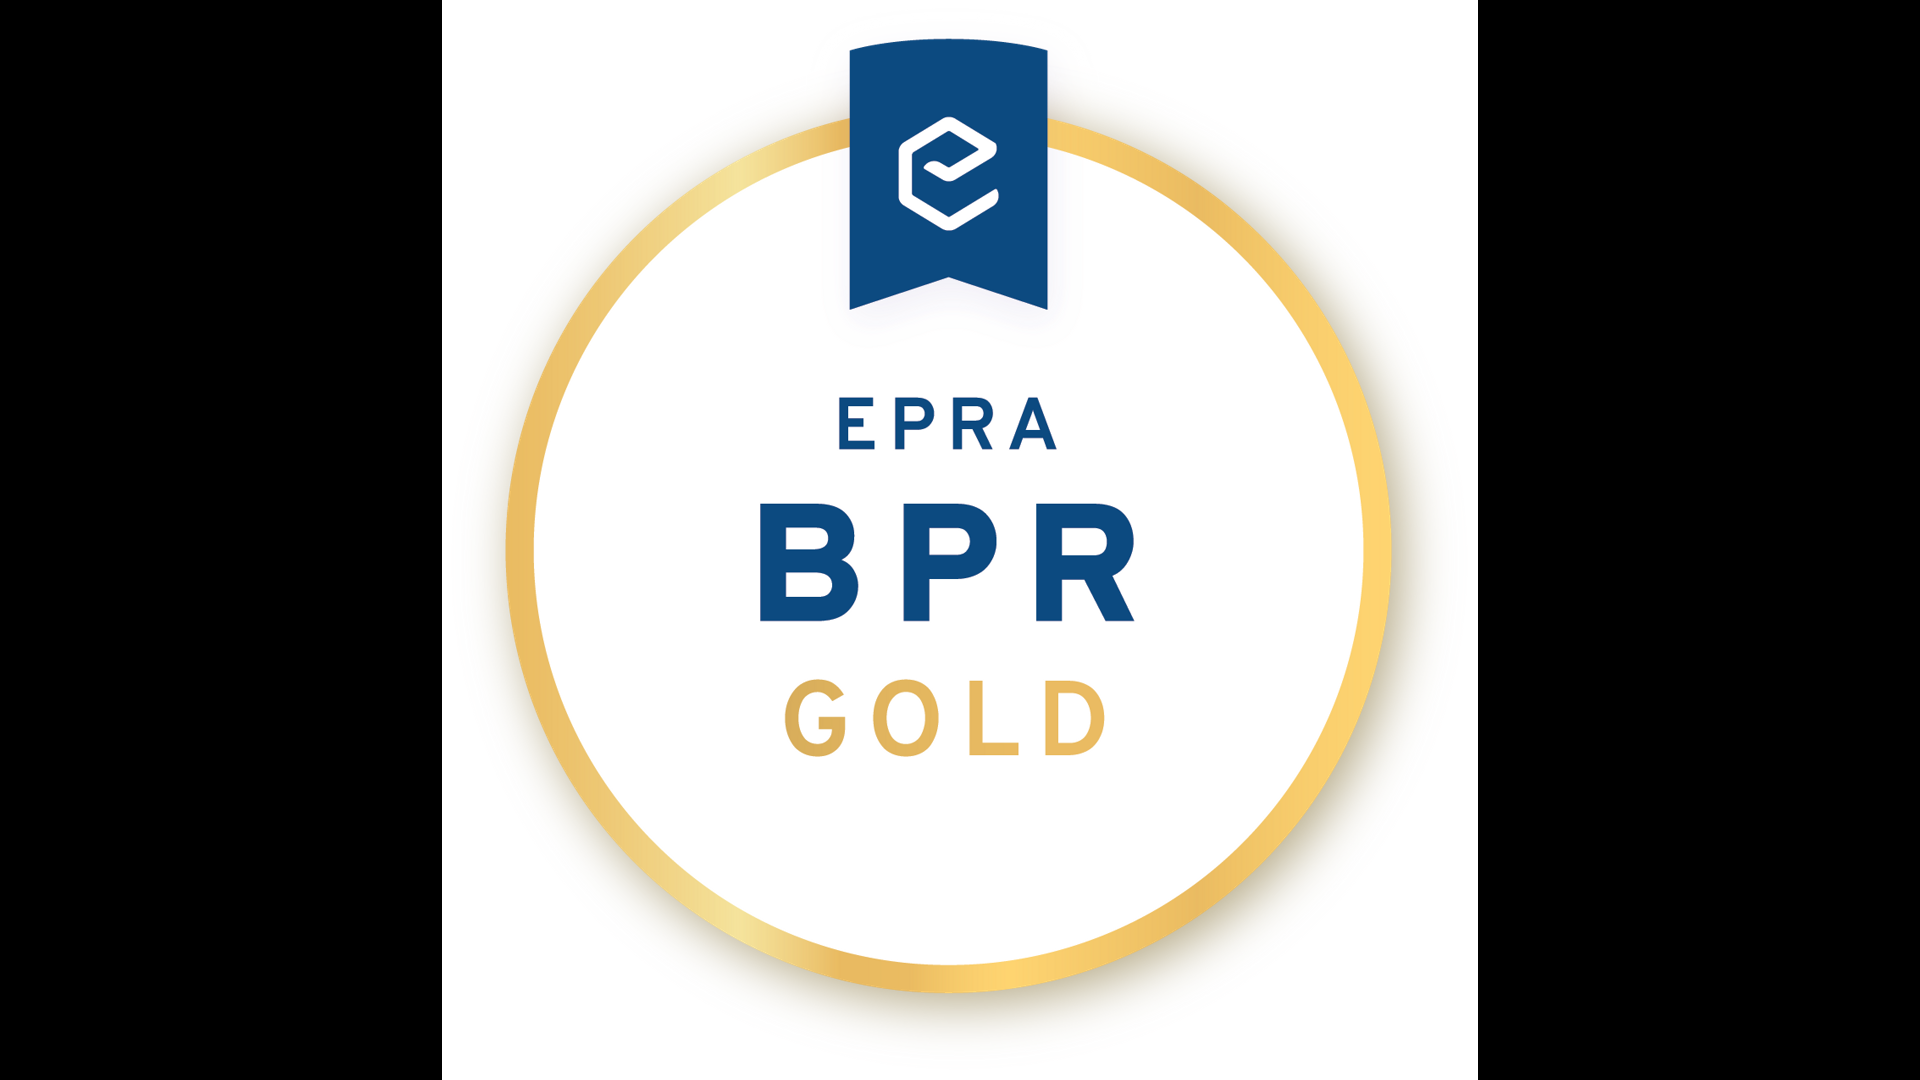 EPRA Best Practices Recommendations GOLD